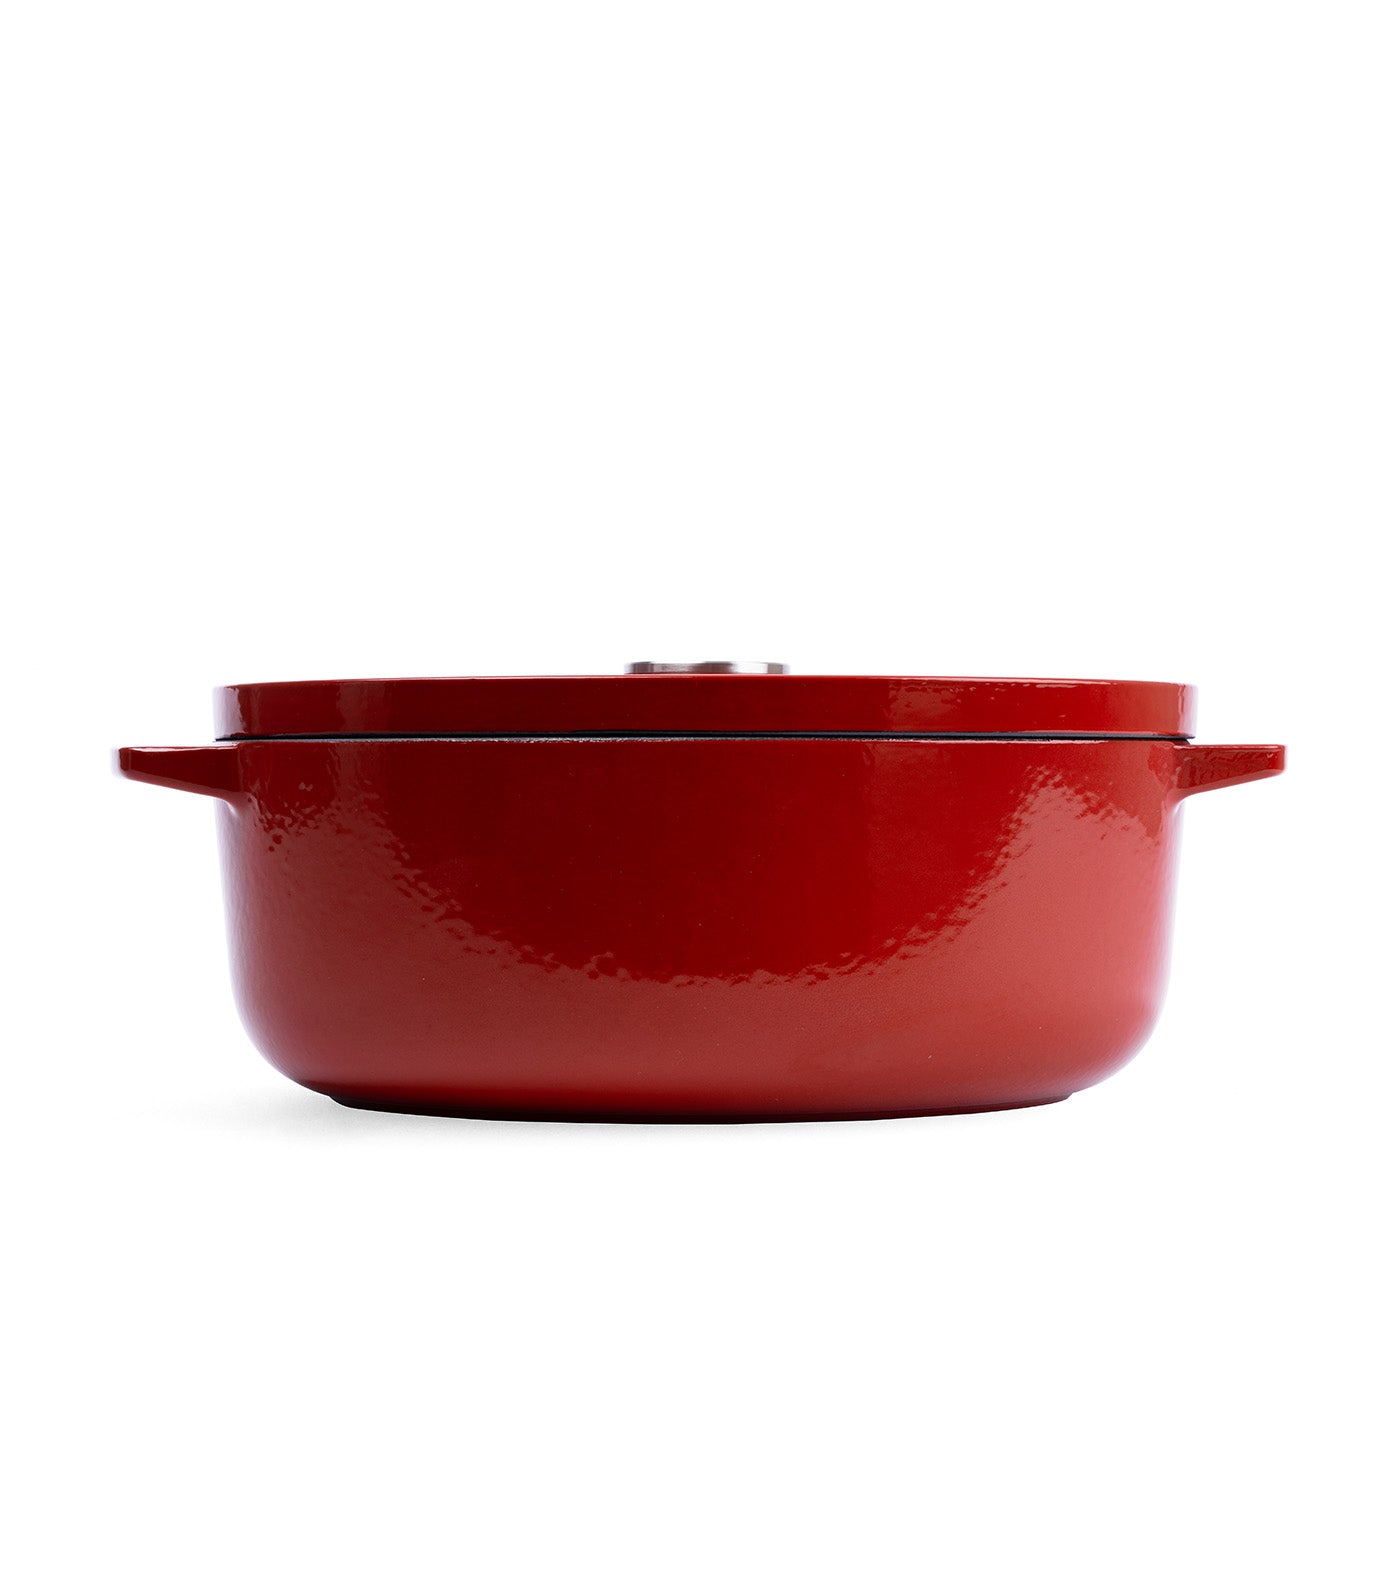 KitchenAid Cast Iron Casserole Empire Red with Lid